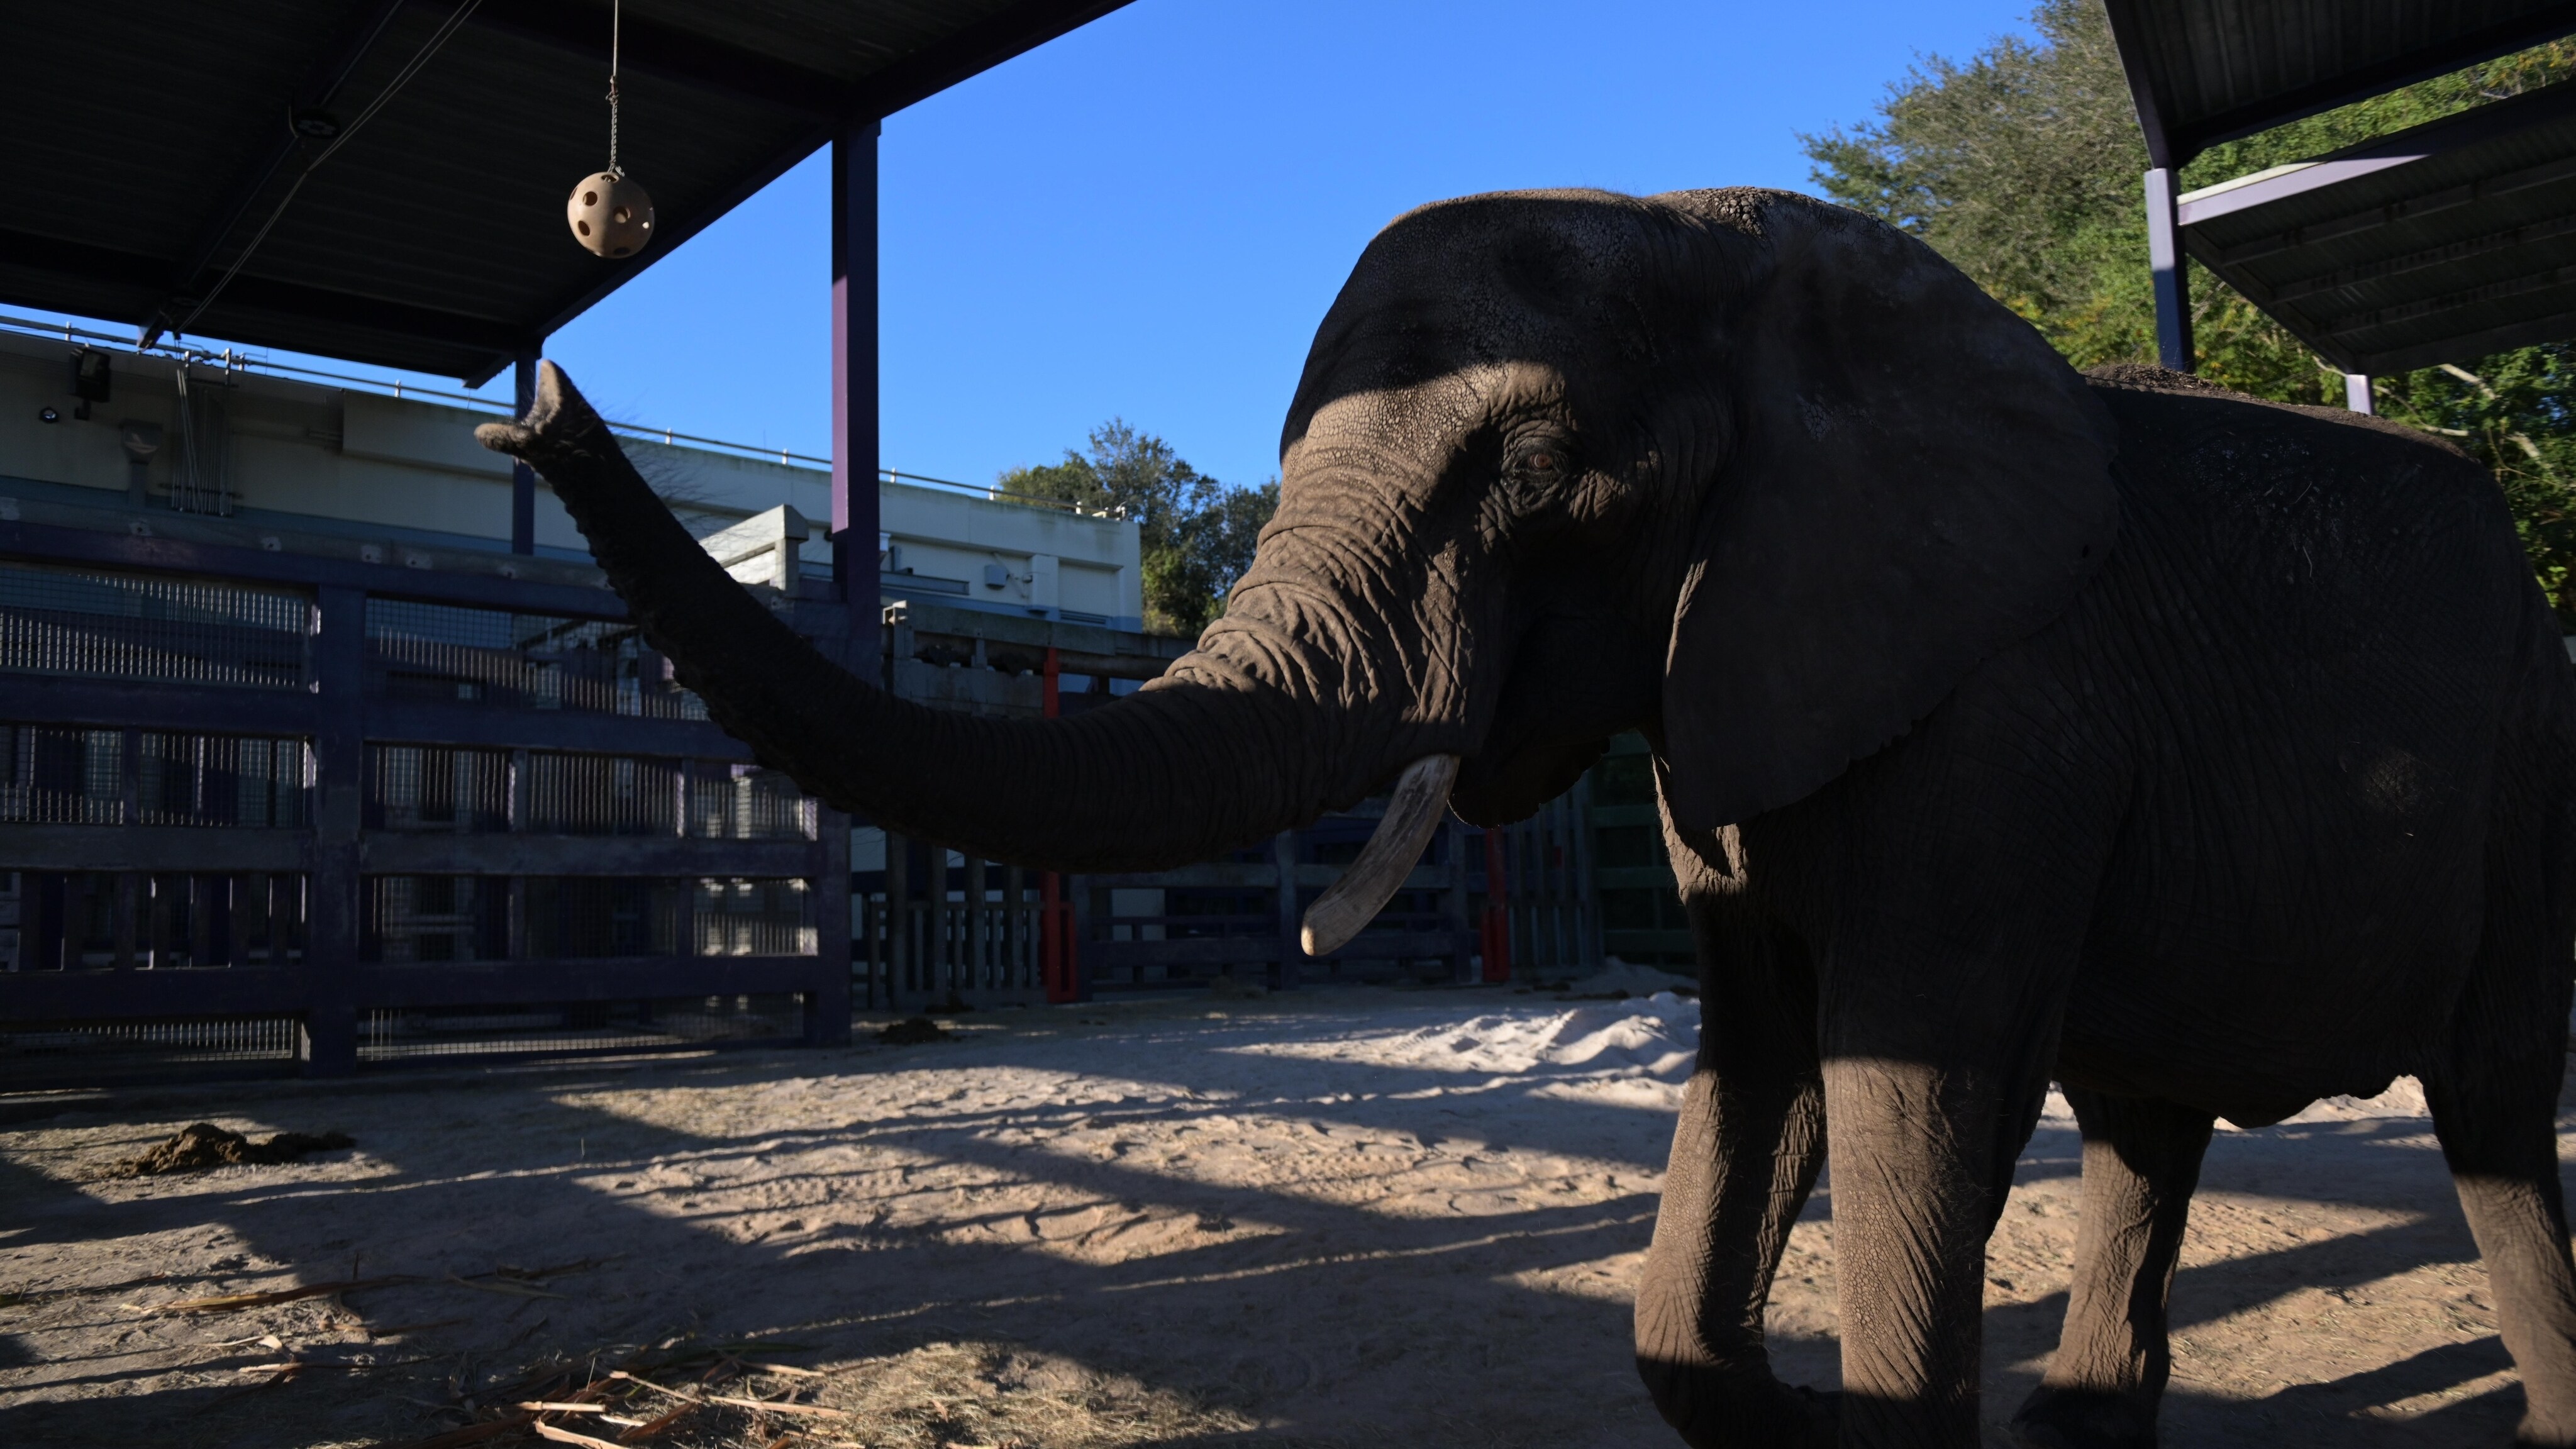 Vasha the Elephant playing with a ball on a string. (Charlene Guilliams/Disney)